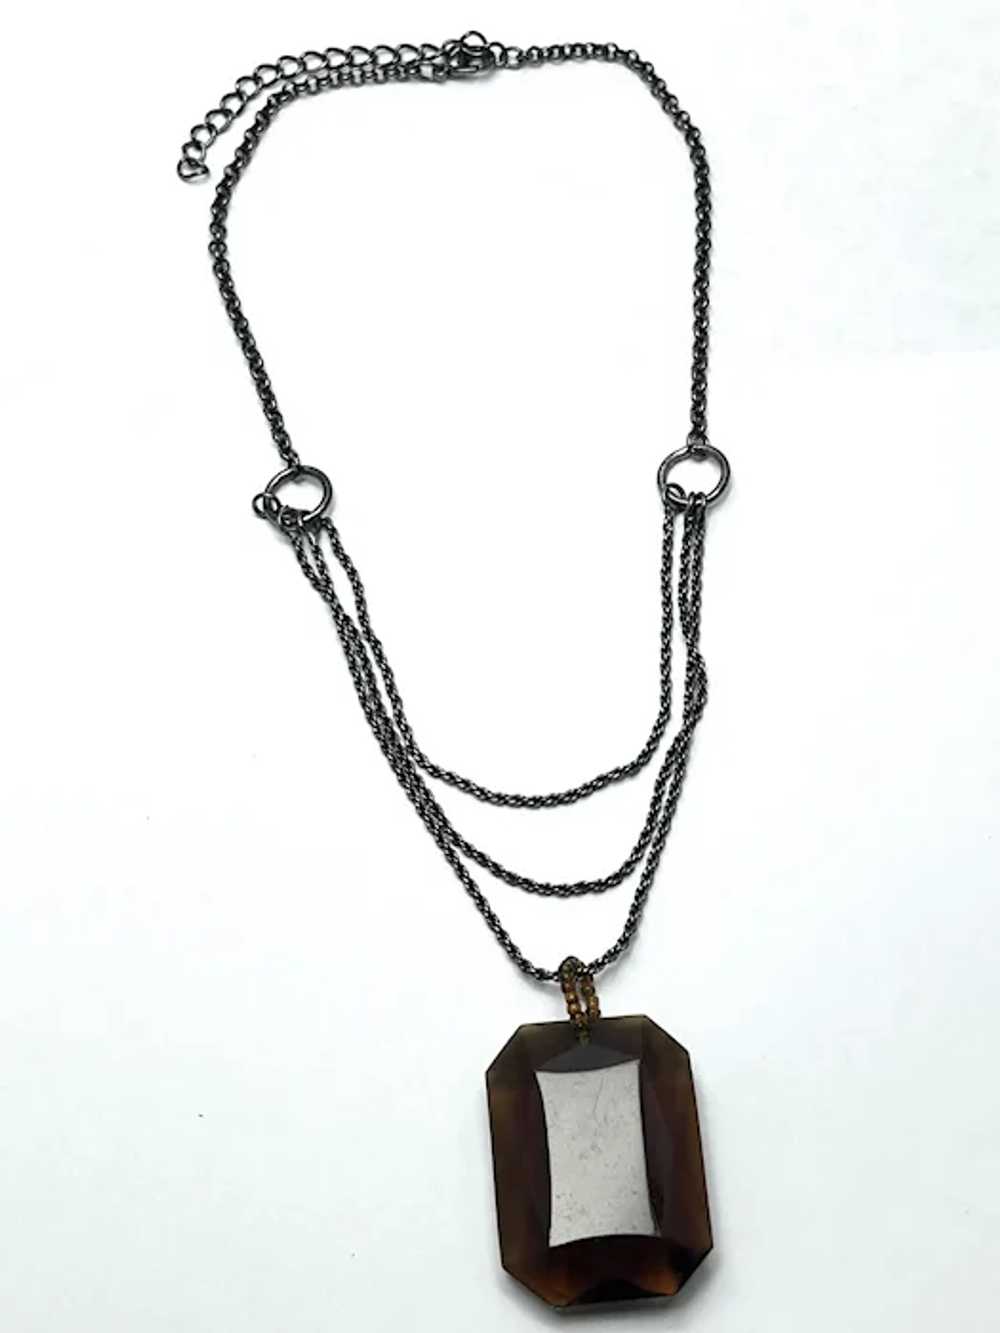 Vintage Crystal Pendant Chain Necklace - image 3